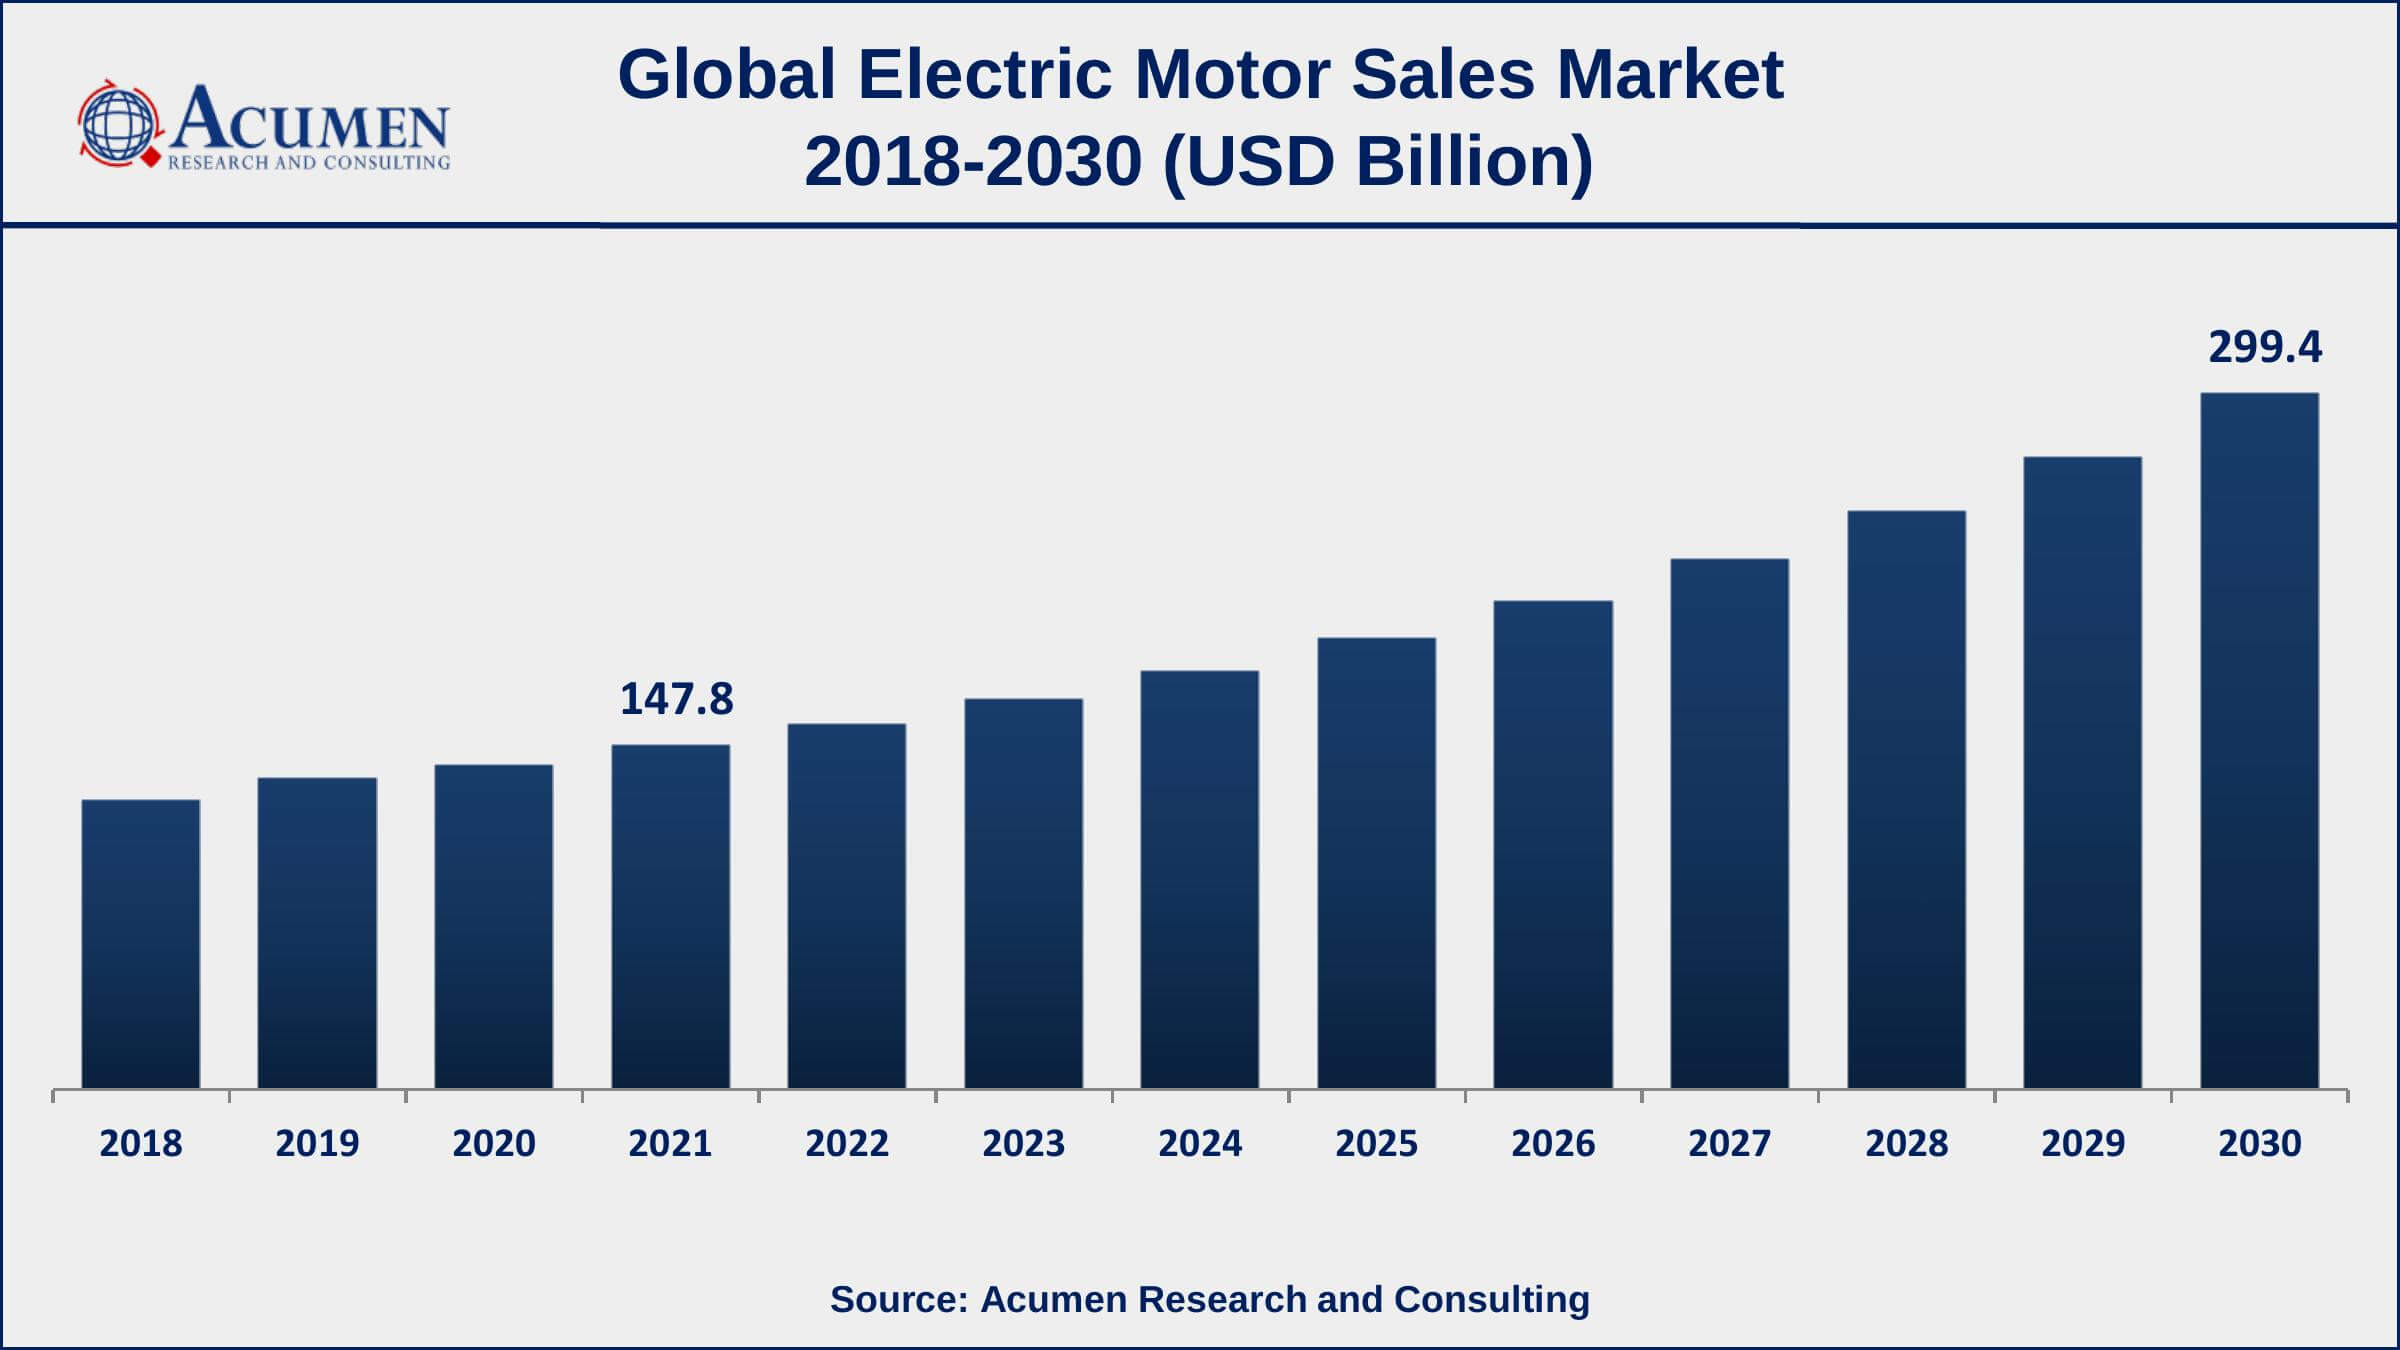 Asia-Pacific region led with more than 48% of electric motor sales market share in 2021